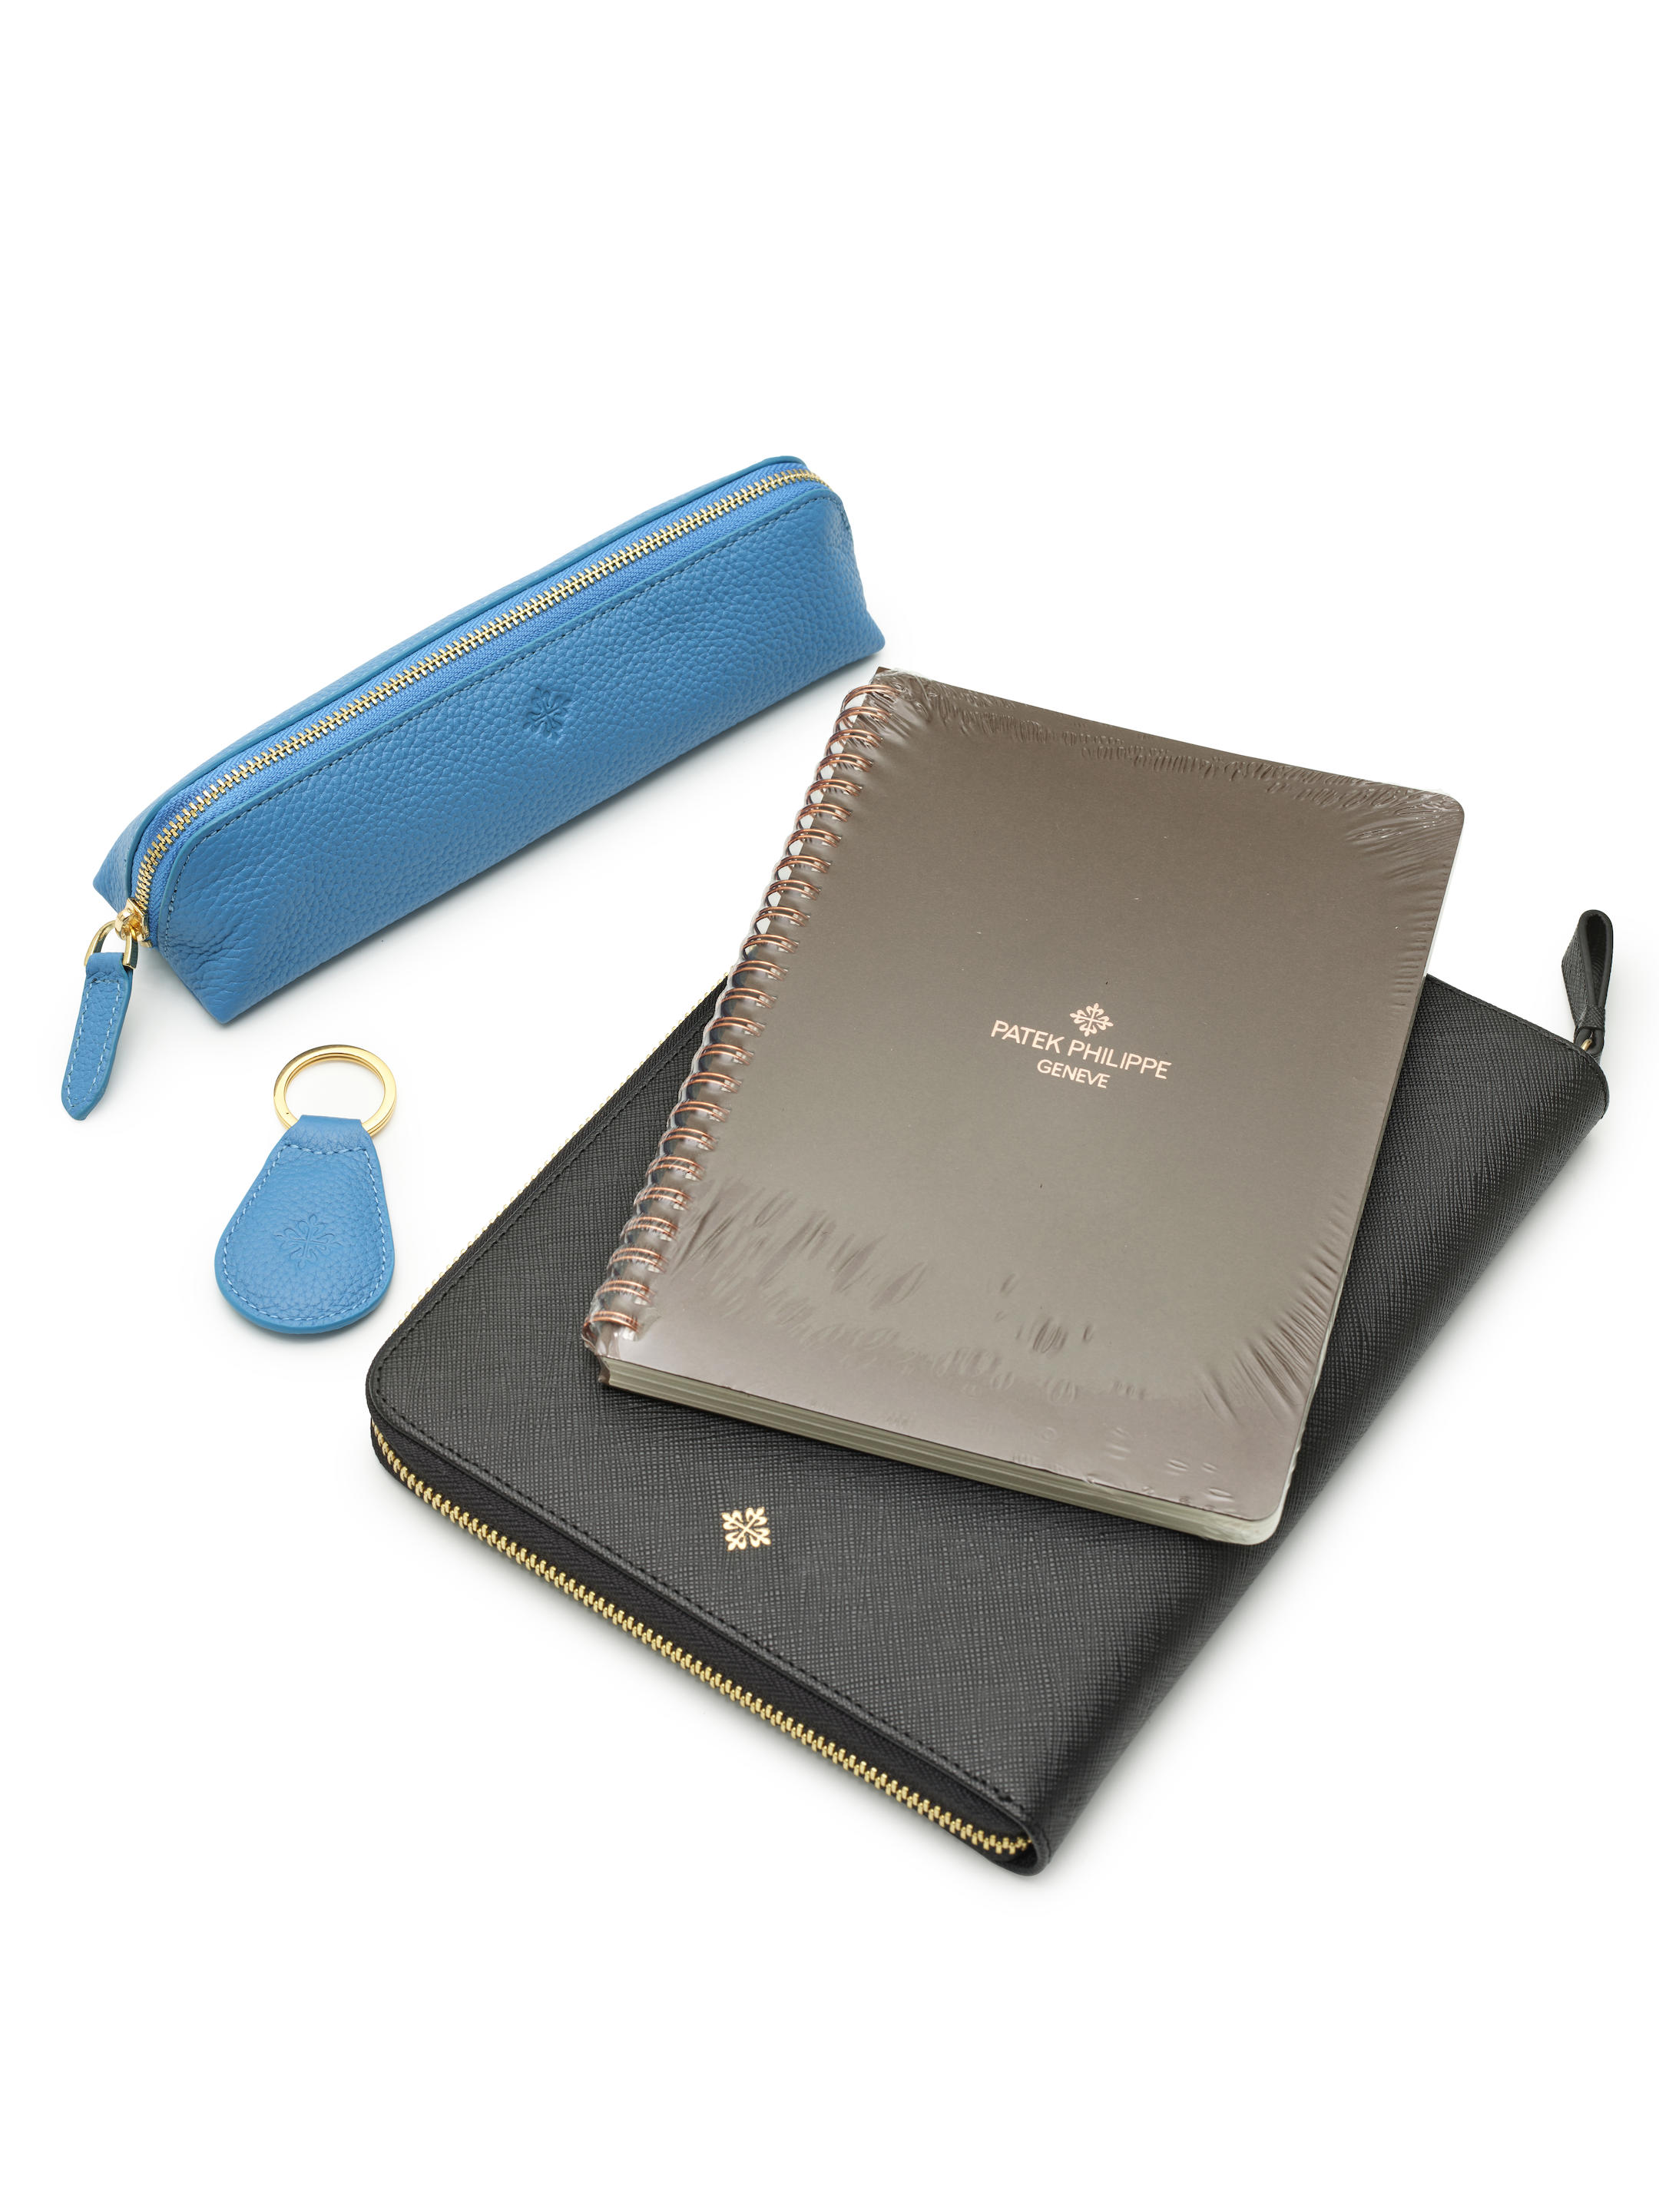 Patek Philippe, Two Pairs Of Gloves, Pen Holder, Notepad And